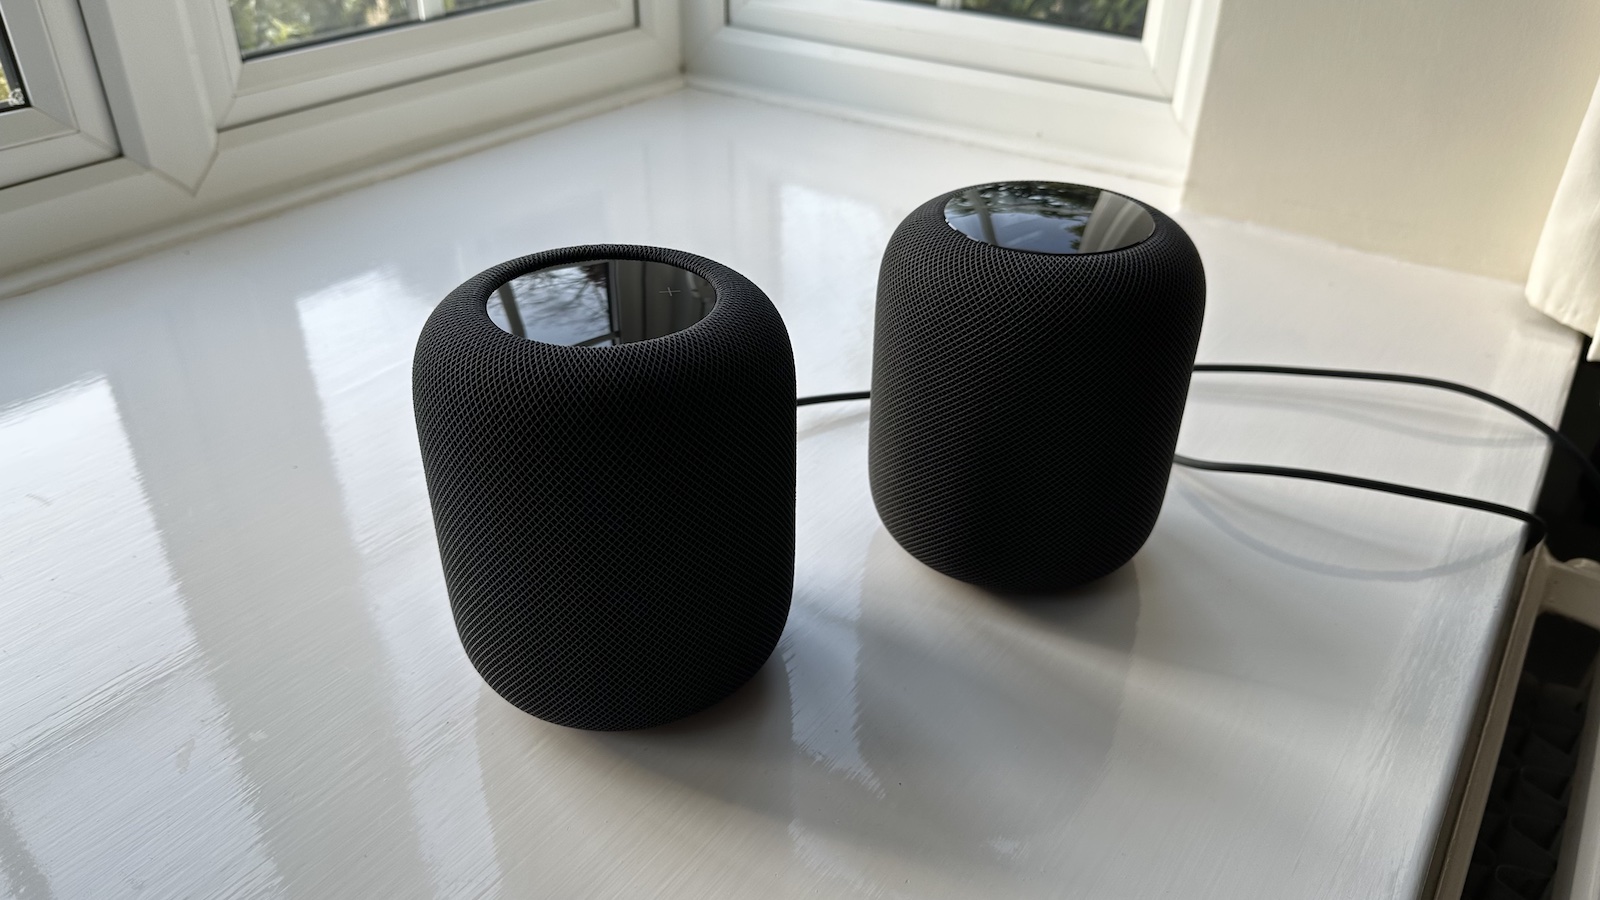 Smart Speakers With Voice Control